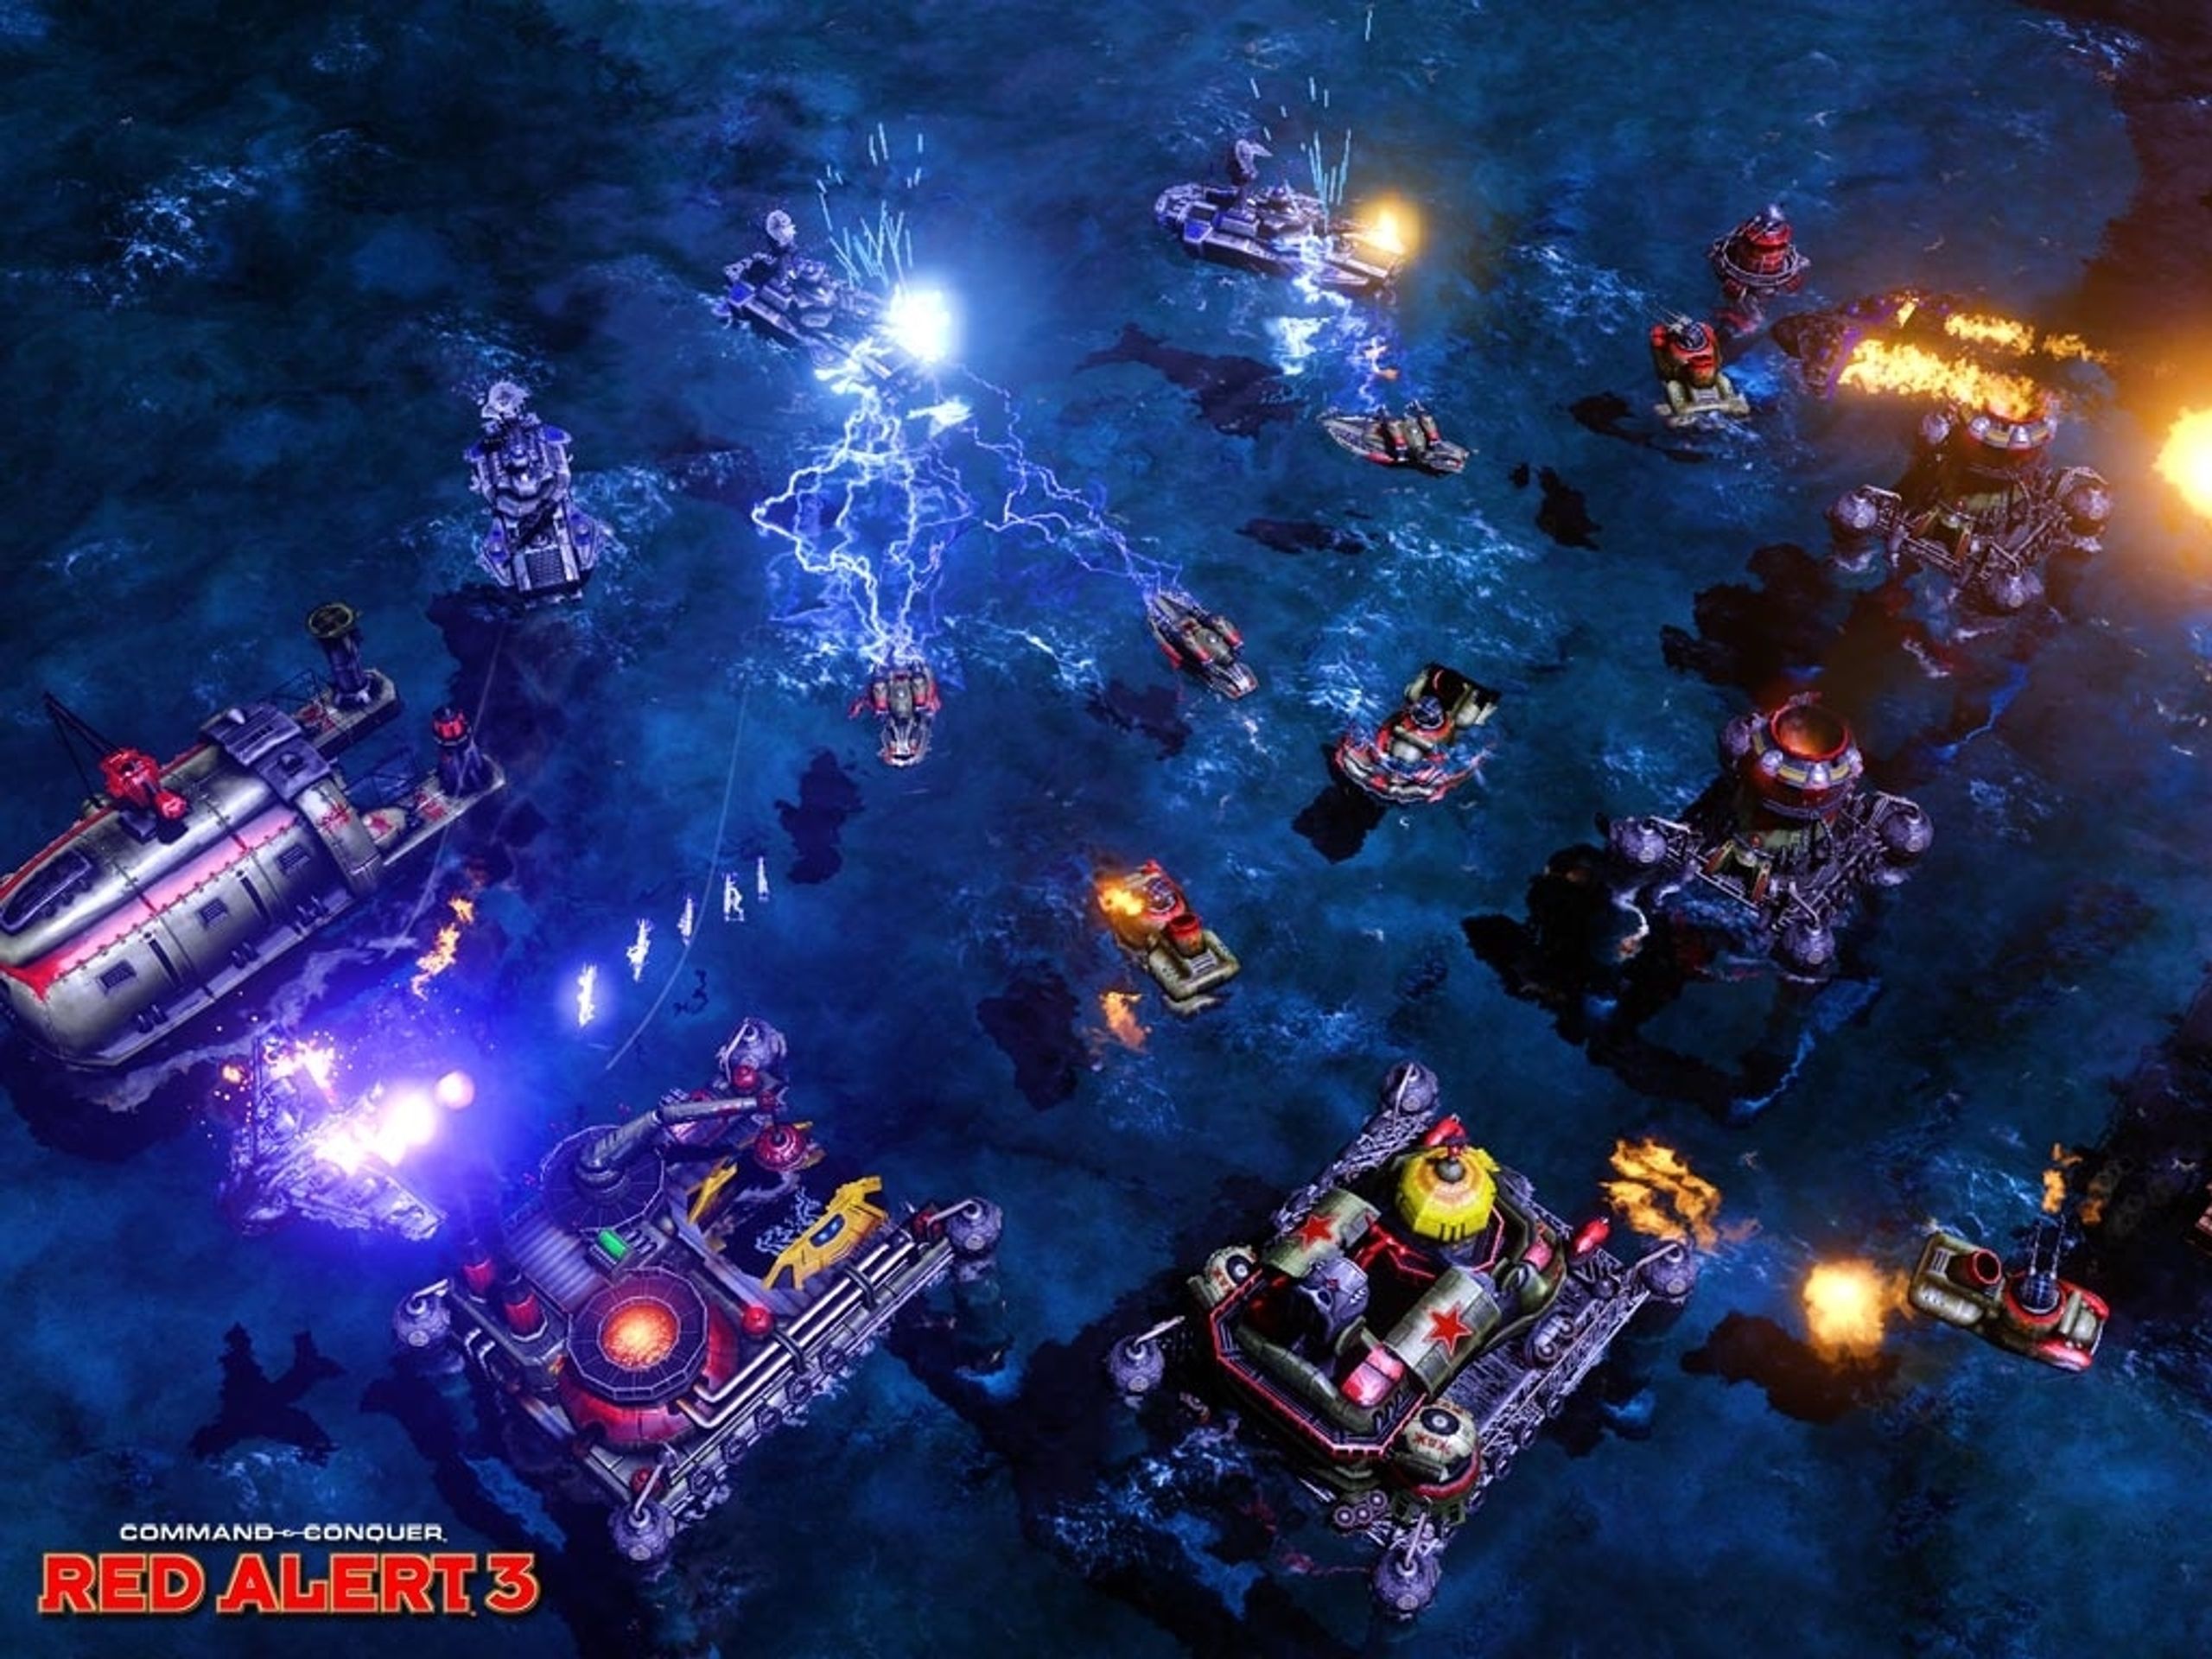 Command & Conquer: Red Alert 3 - Red Alert 3 galerie (14/16)